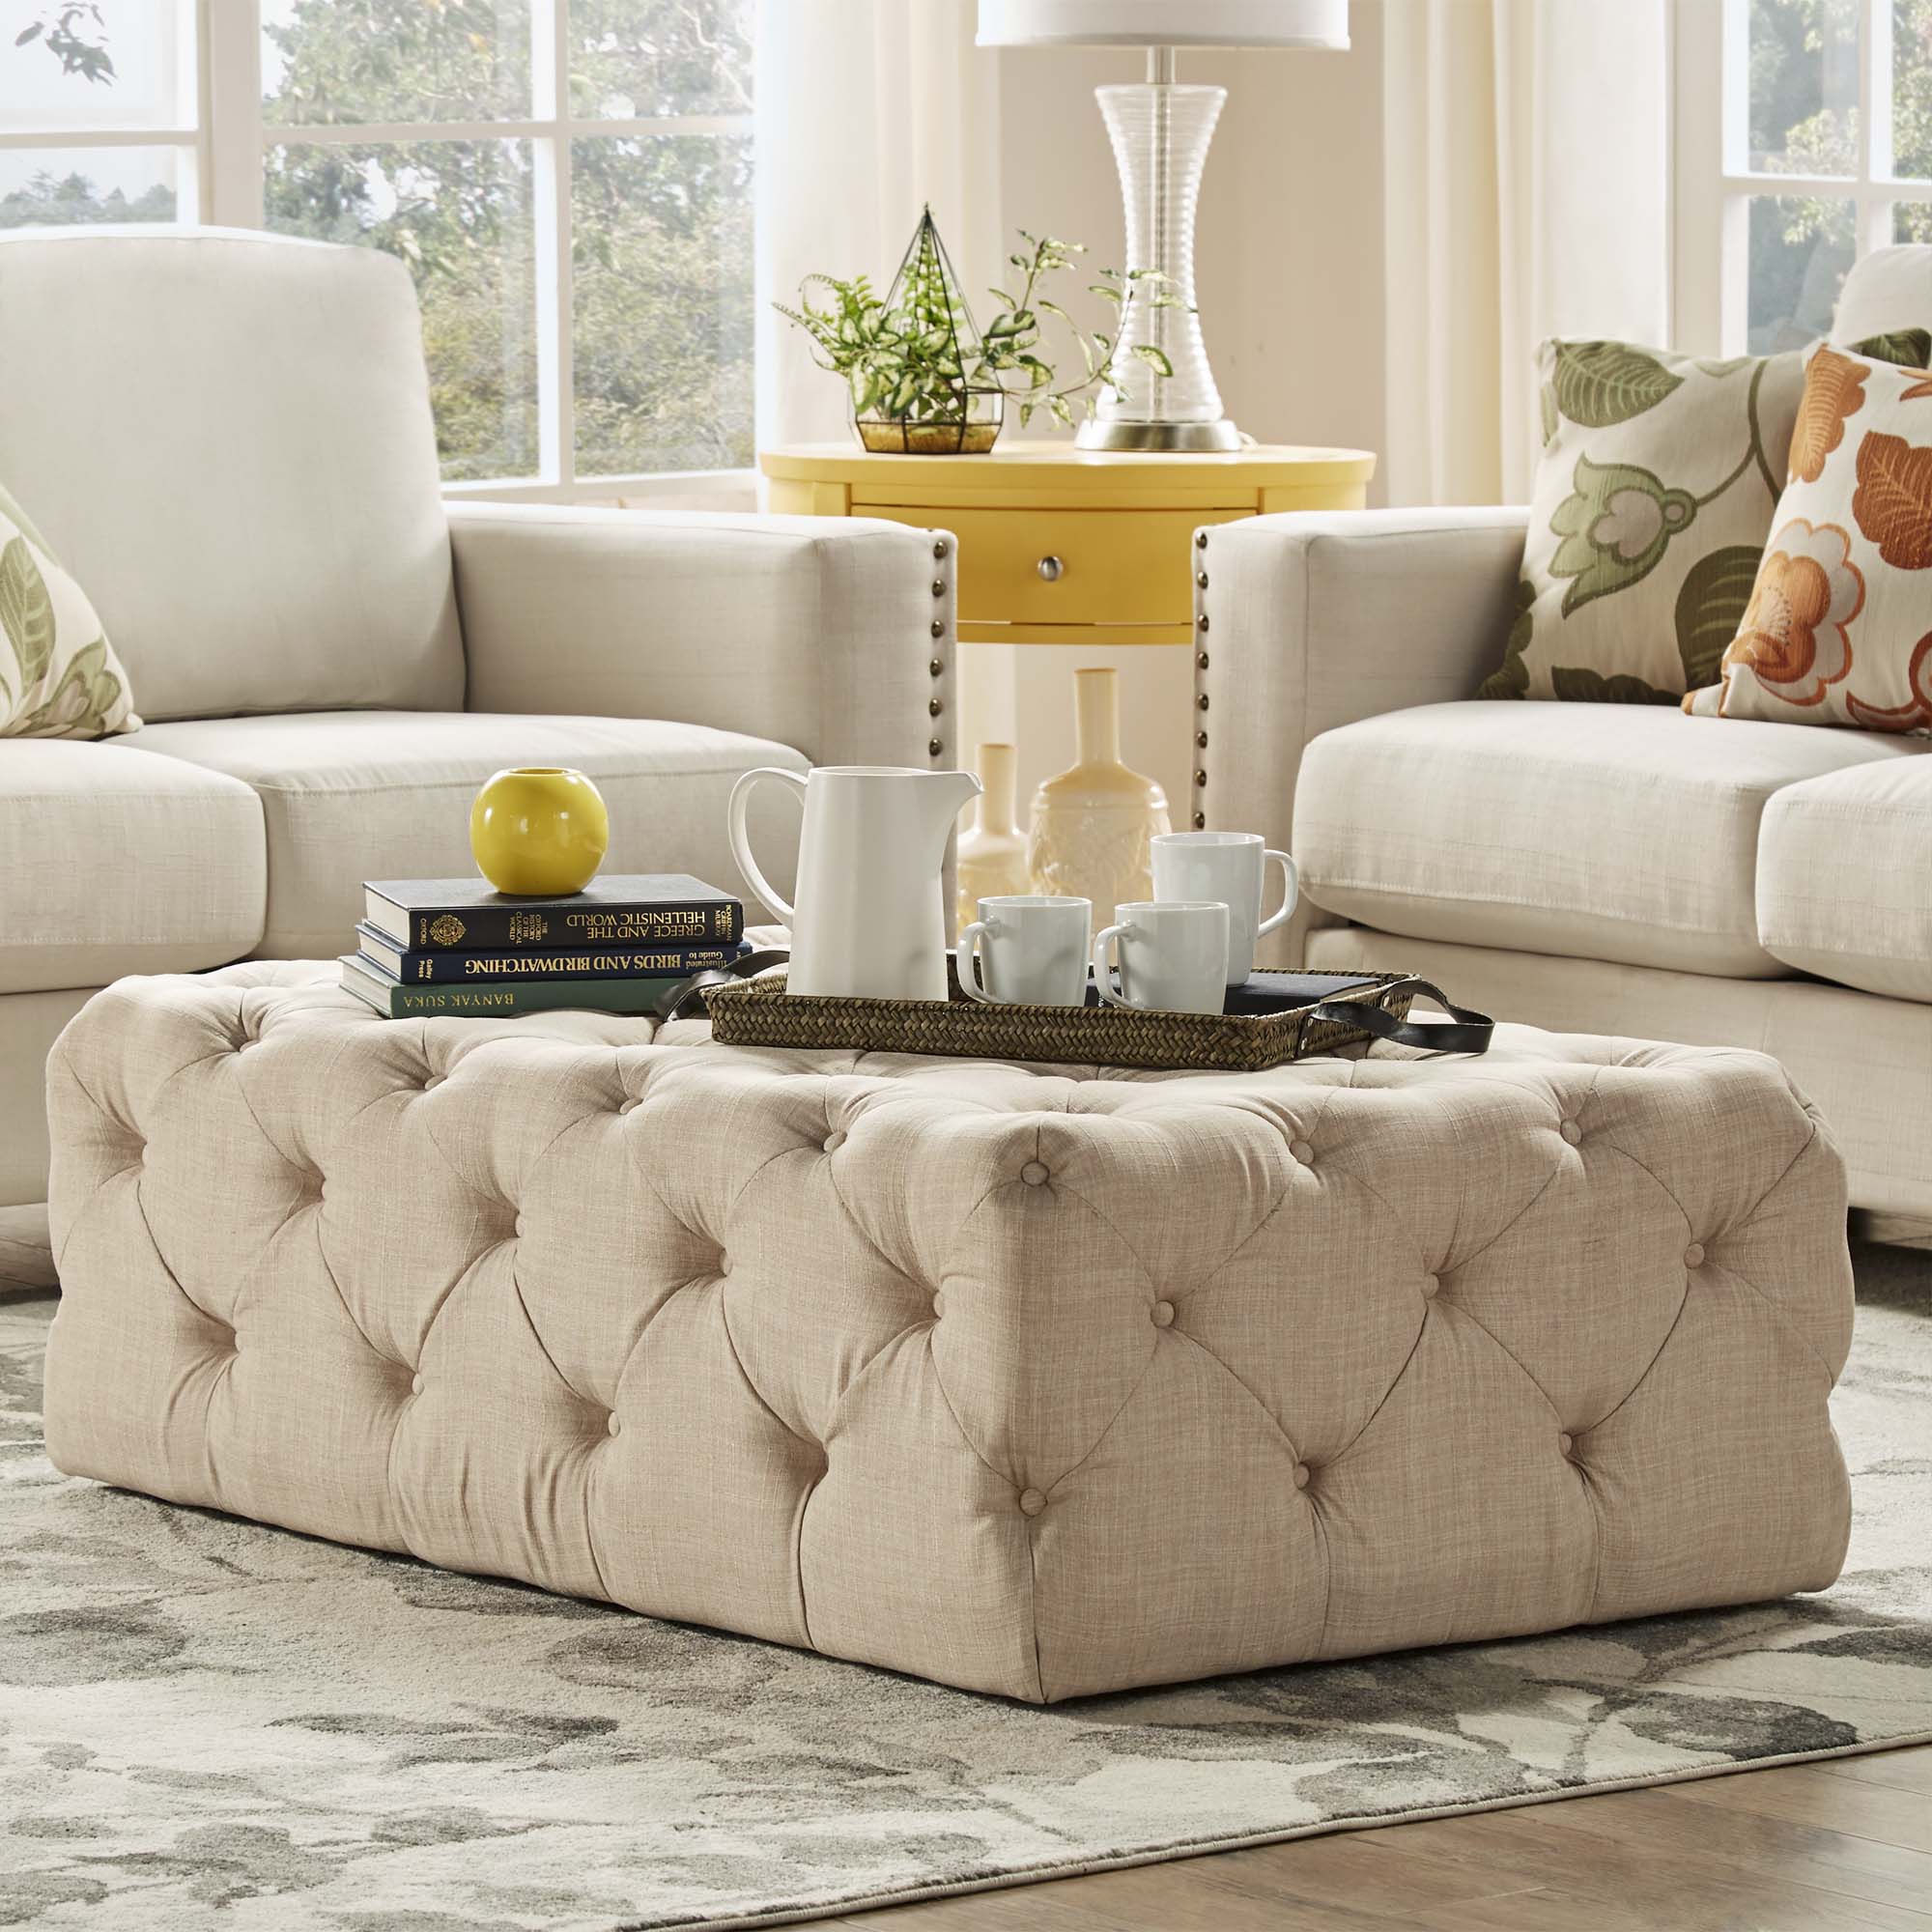 Rectangular Tufted Ottoman with Casters